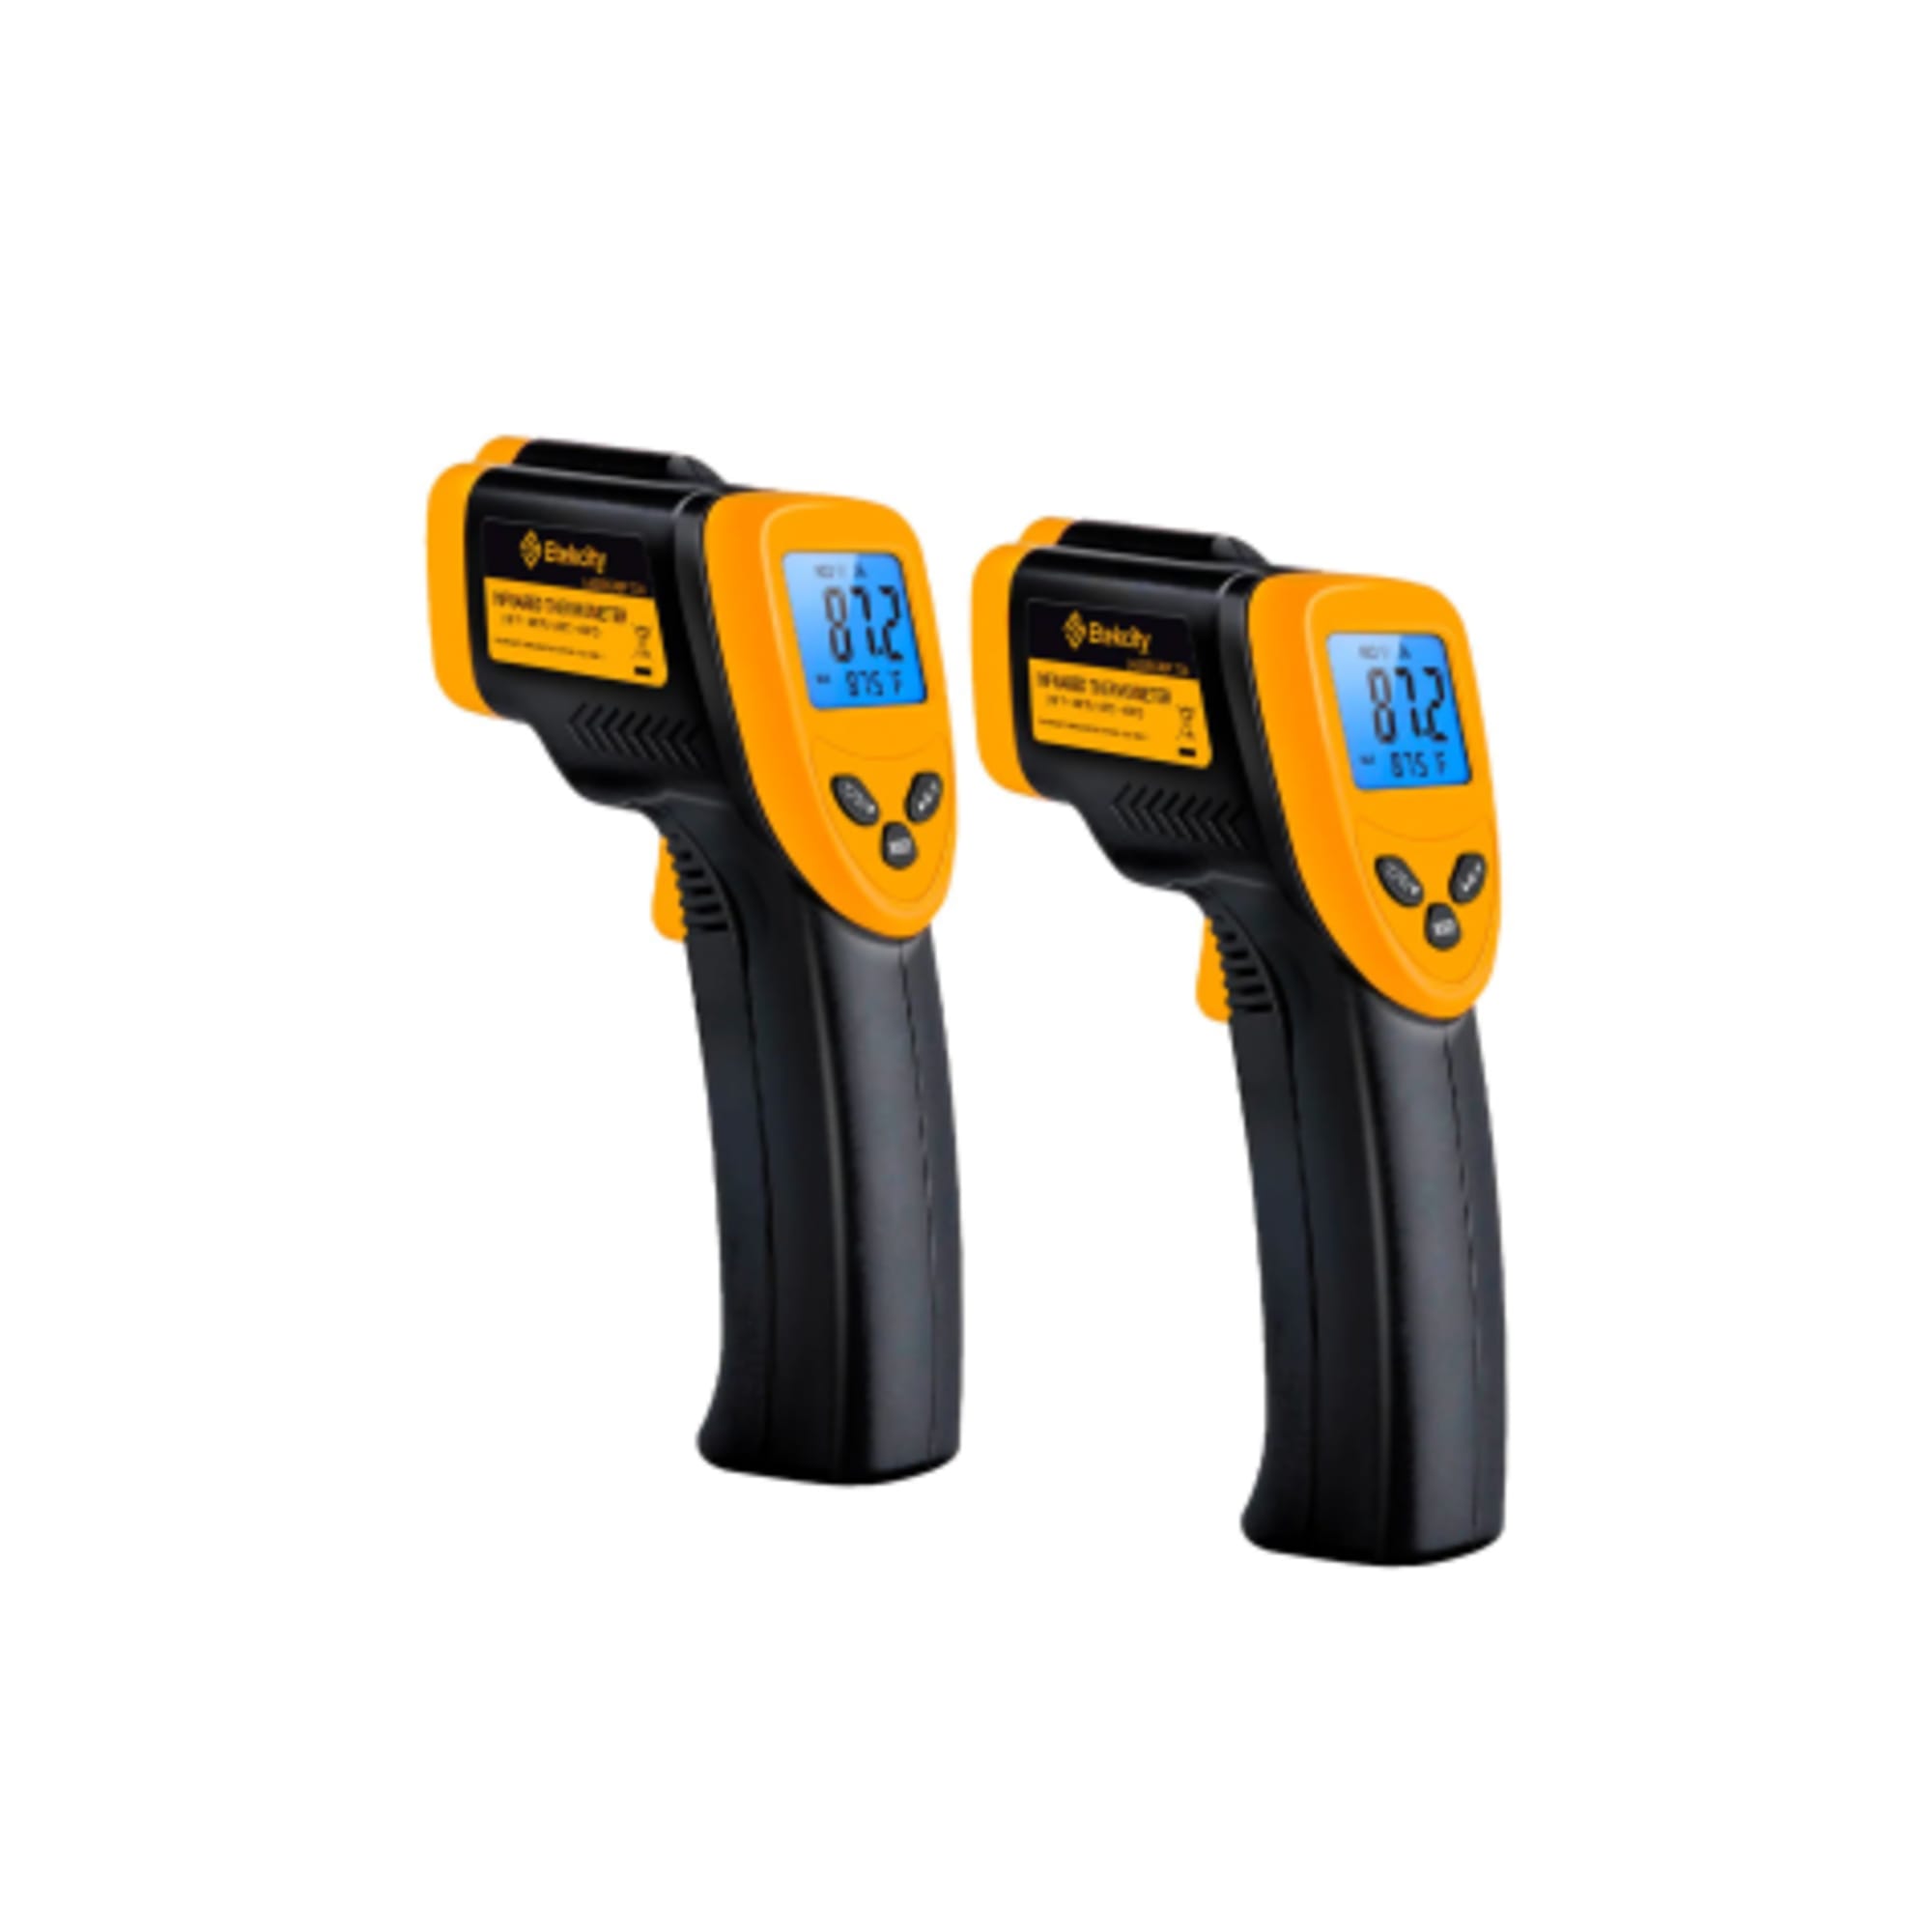 https://res.cloudinary.com/kitchenwarehouse/image/upload/c_fill,g_face,w_475/f_auto/t_PDP_2000x2000/Supplier%20Images%20/2000px/Etekcity-774-Infrared-Thermometer-Set-of-2_1_2000px.jpg